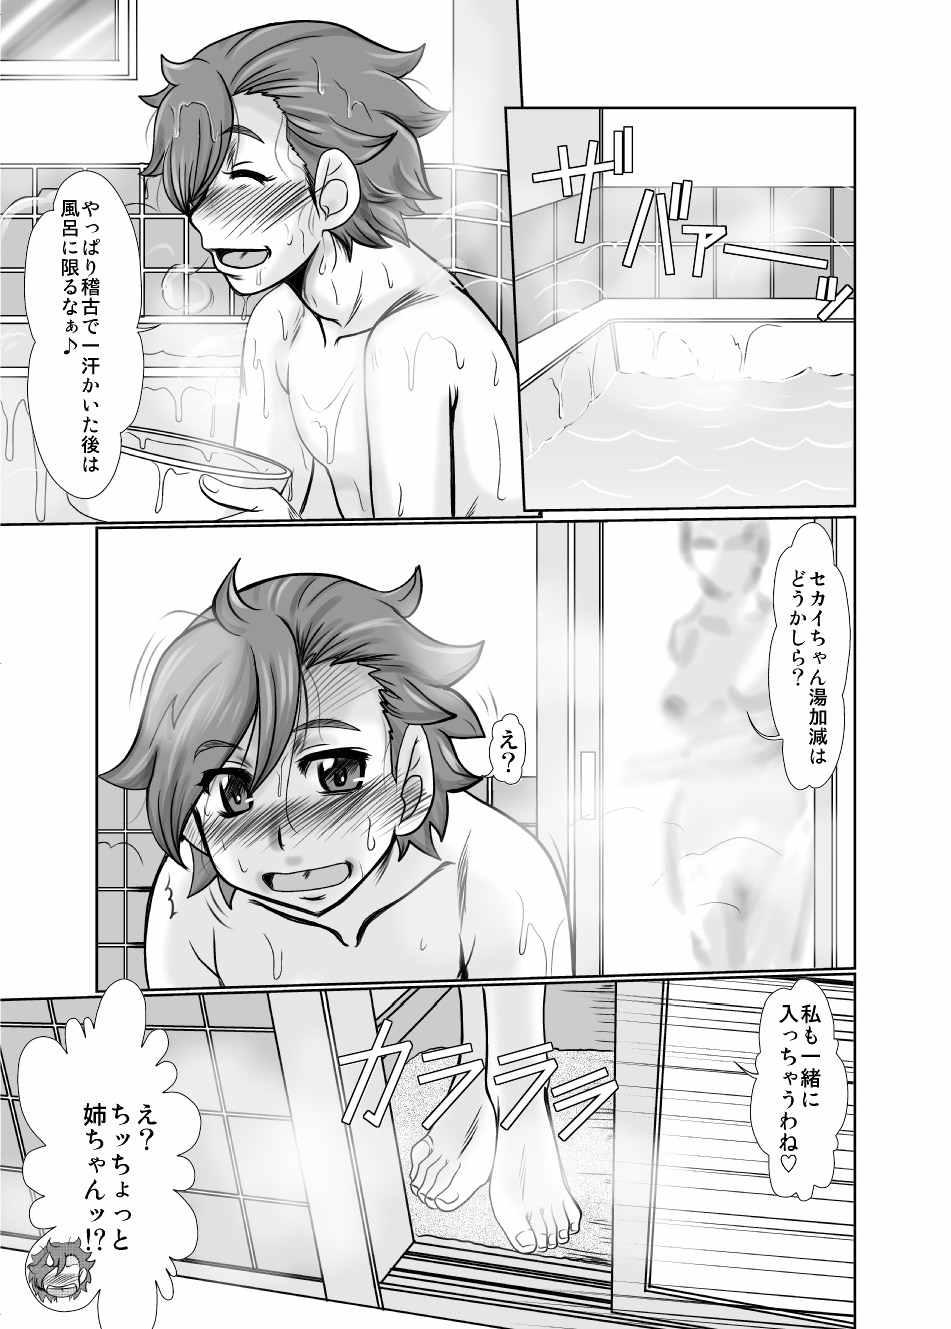 Tall F-83 - Gundam build fighters try Lez - Page 9